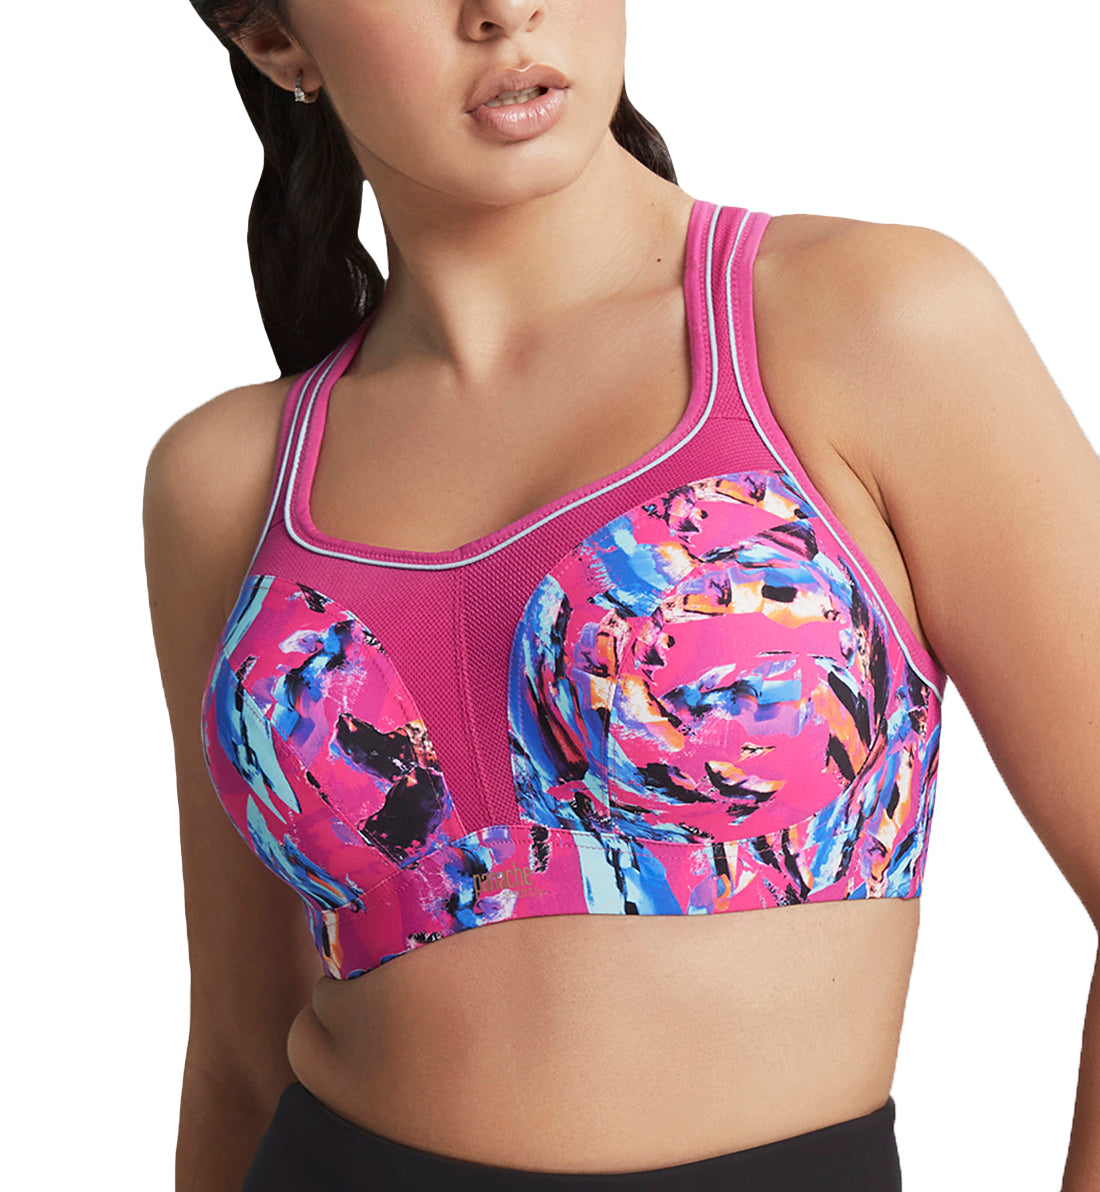 Panache Underwire Sports Bra (5021),28FF,Abstract Orchid - Abstract Orchid,28FF